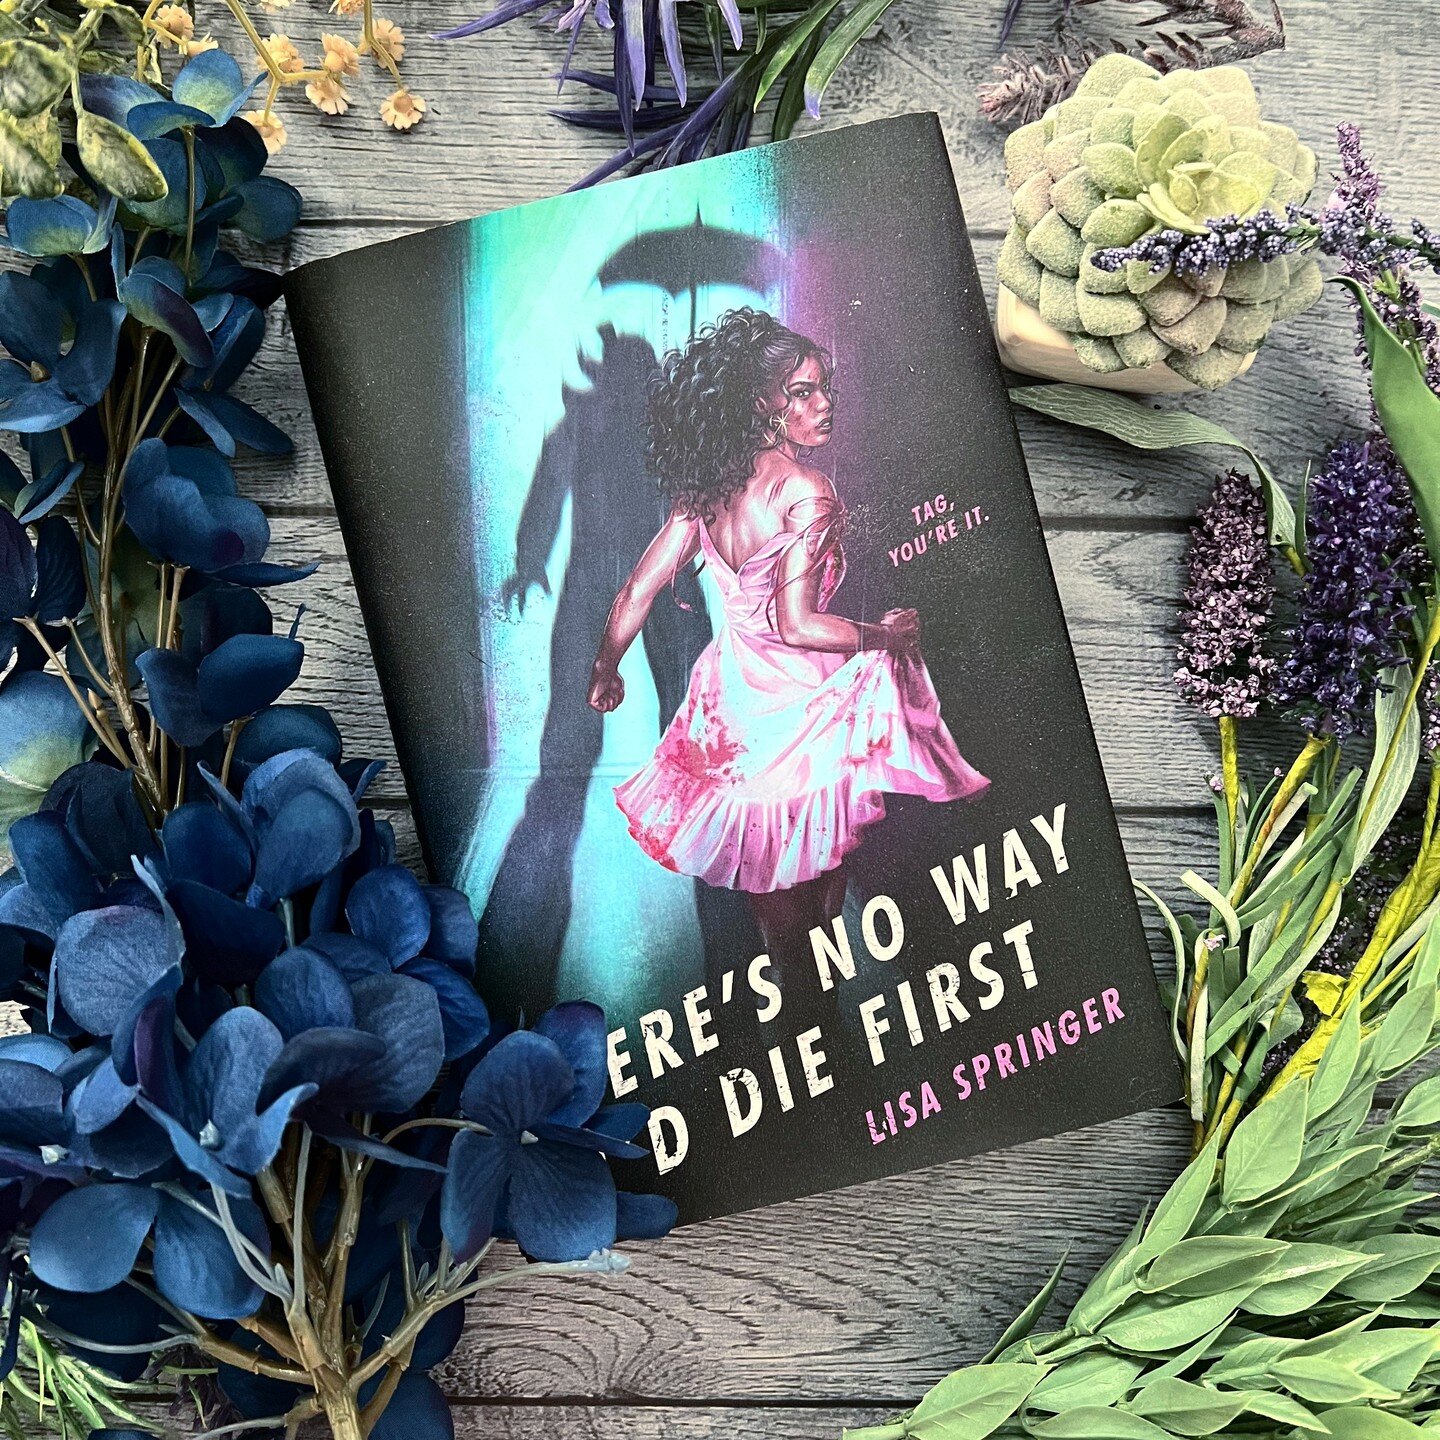 Perfect for spooky season!! This YA slasher written by the wonderful Lisa Springer is so so much fun! If you haven&rsquo;t read it already, definitely check it out!
#yabooks #yahorror #spookyseason